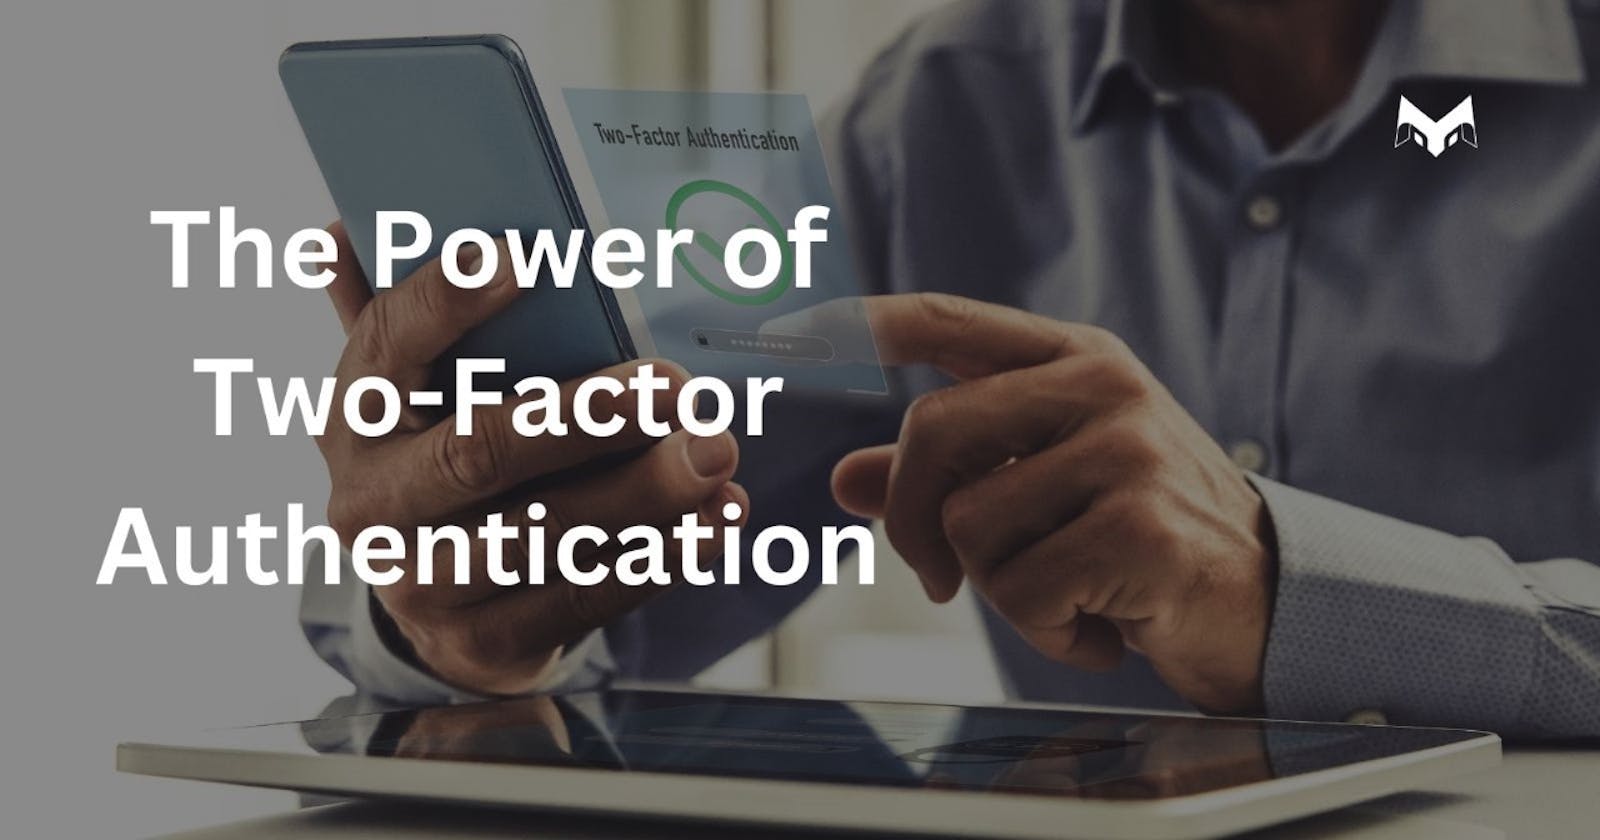 The Power of Two-Factor Authentication